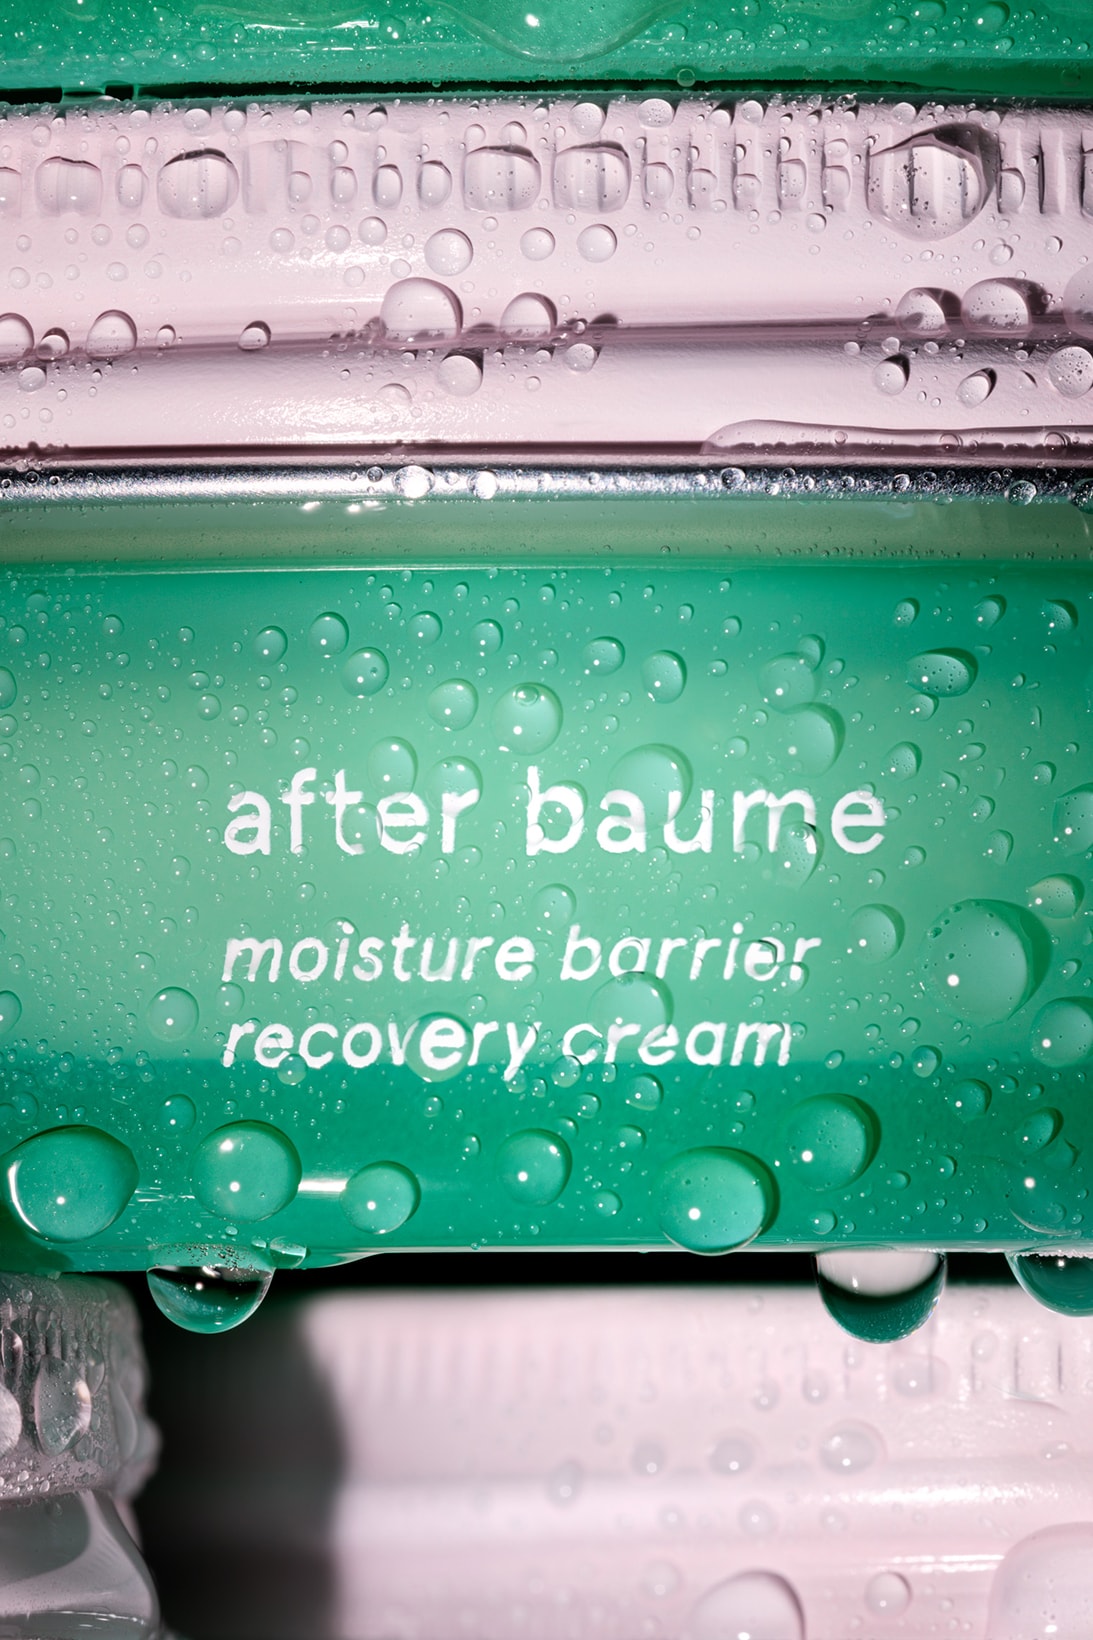 Glossier New After Baume Moisturizer Skincare Face Cream